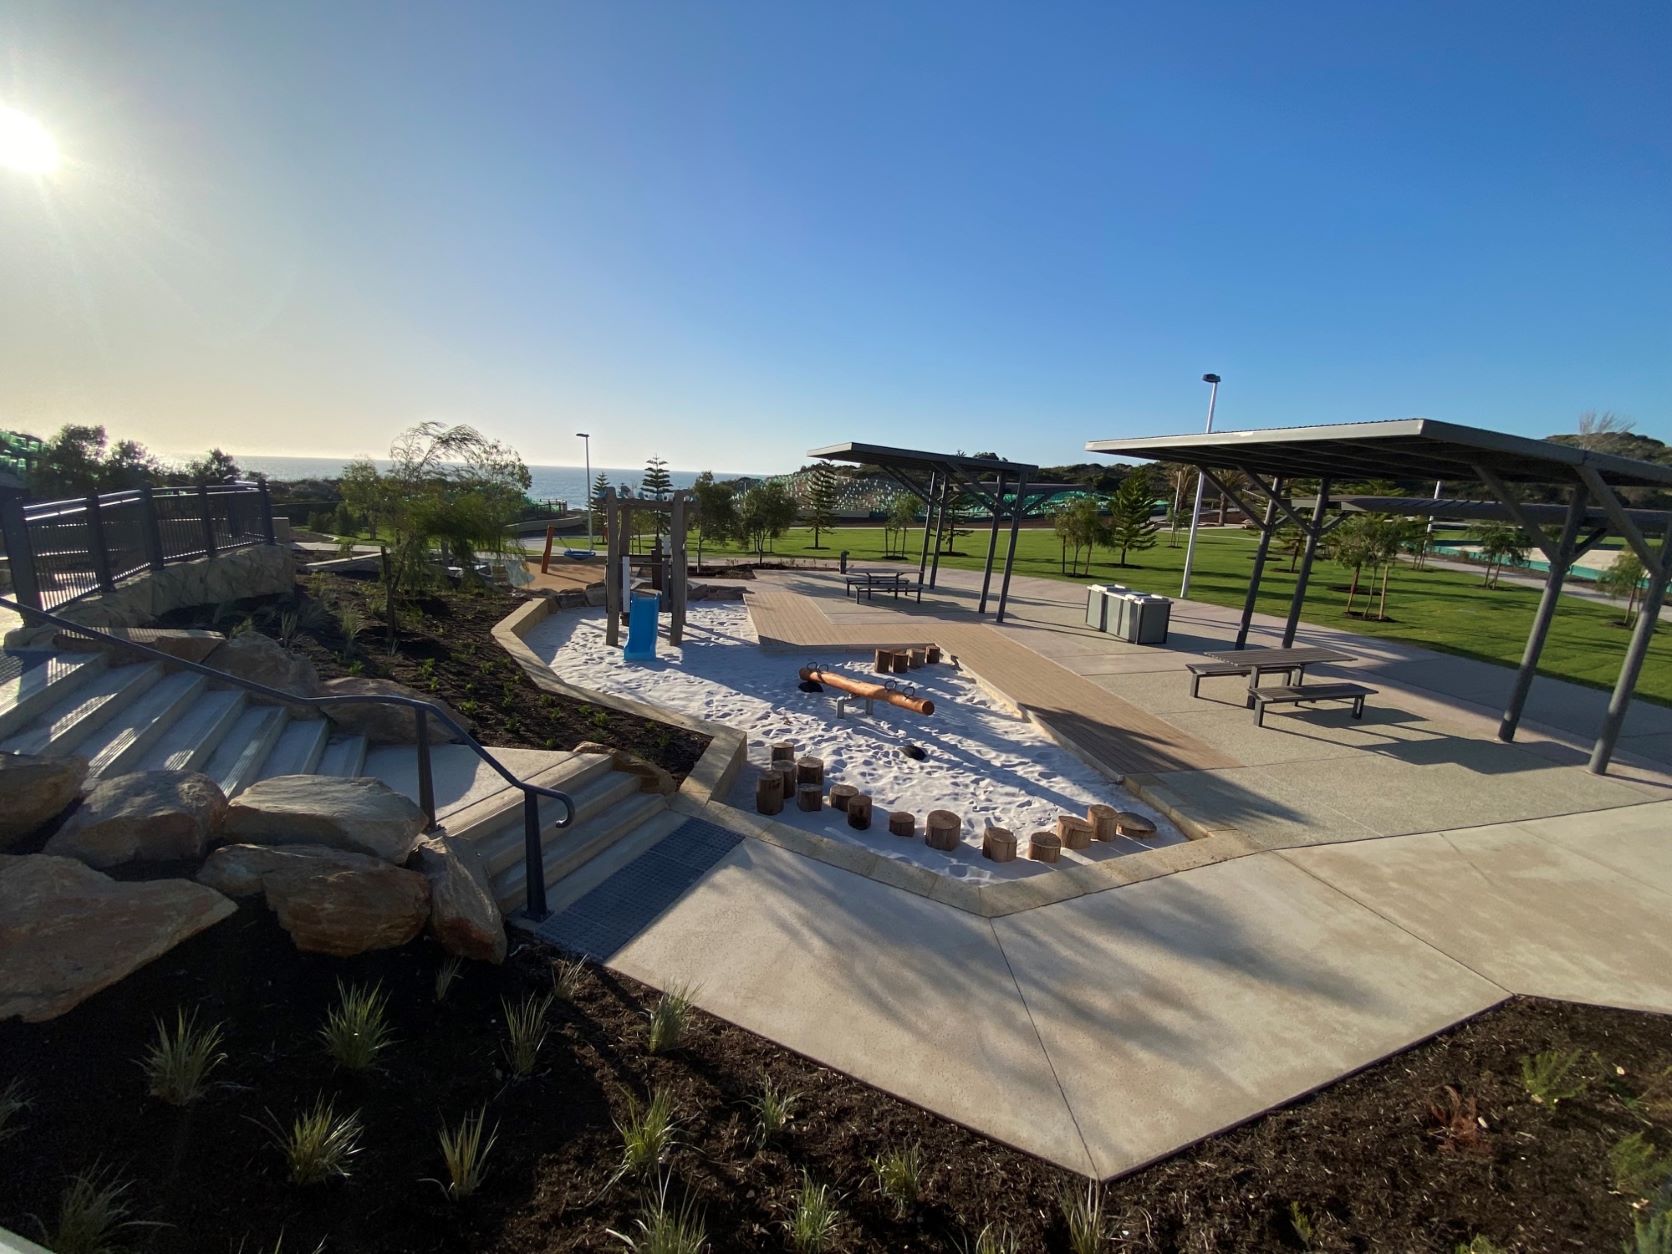 A view of the playground at Capricorn Beach, showcasing the vibrant play area and recreational facilities.